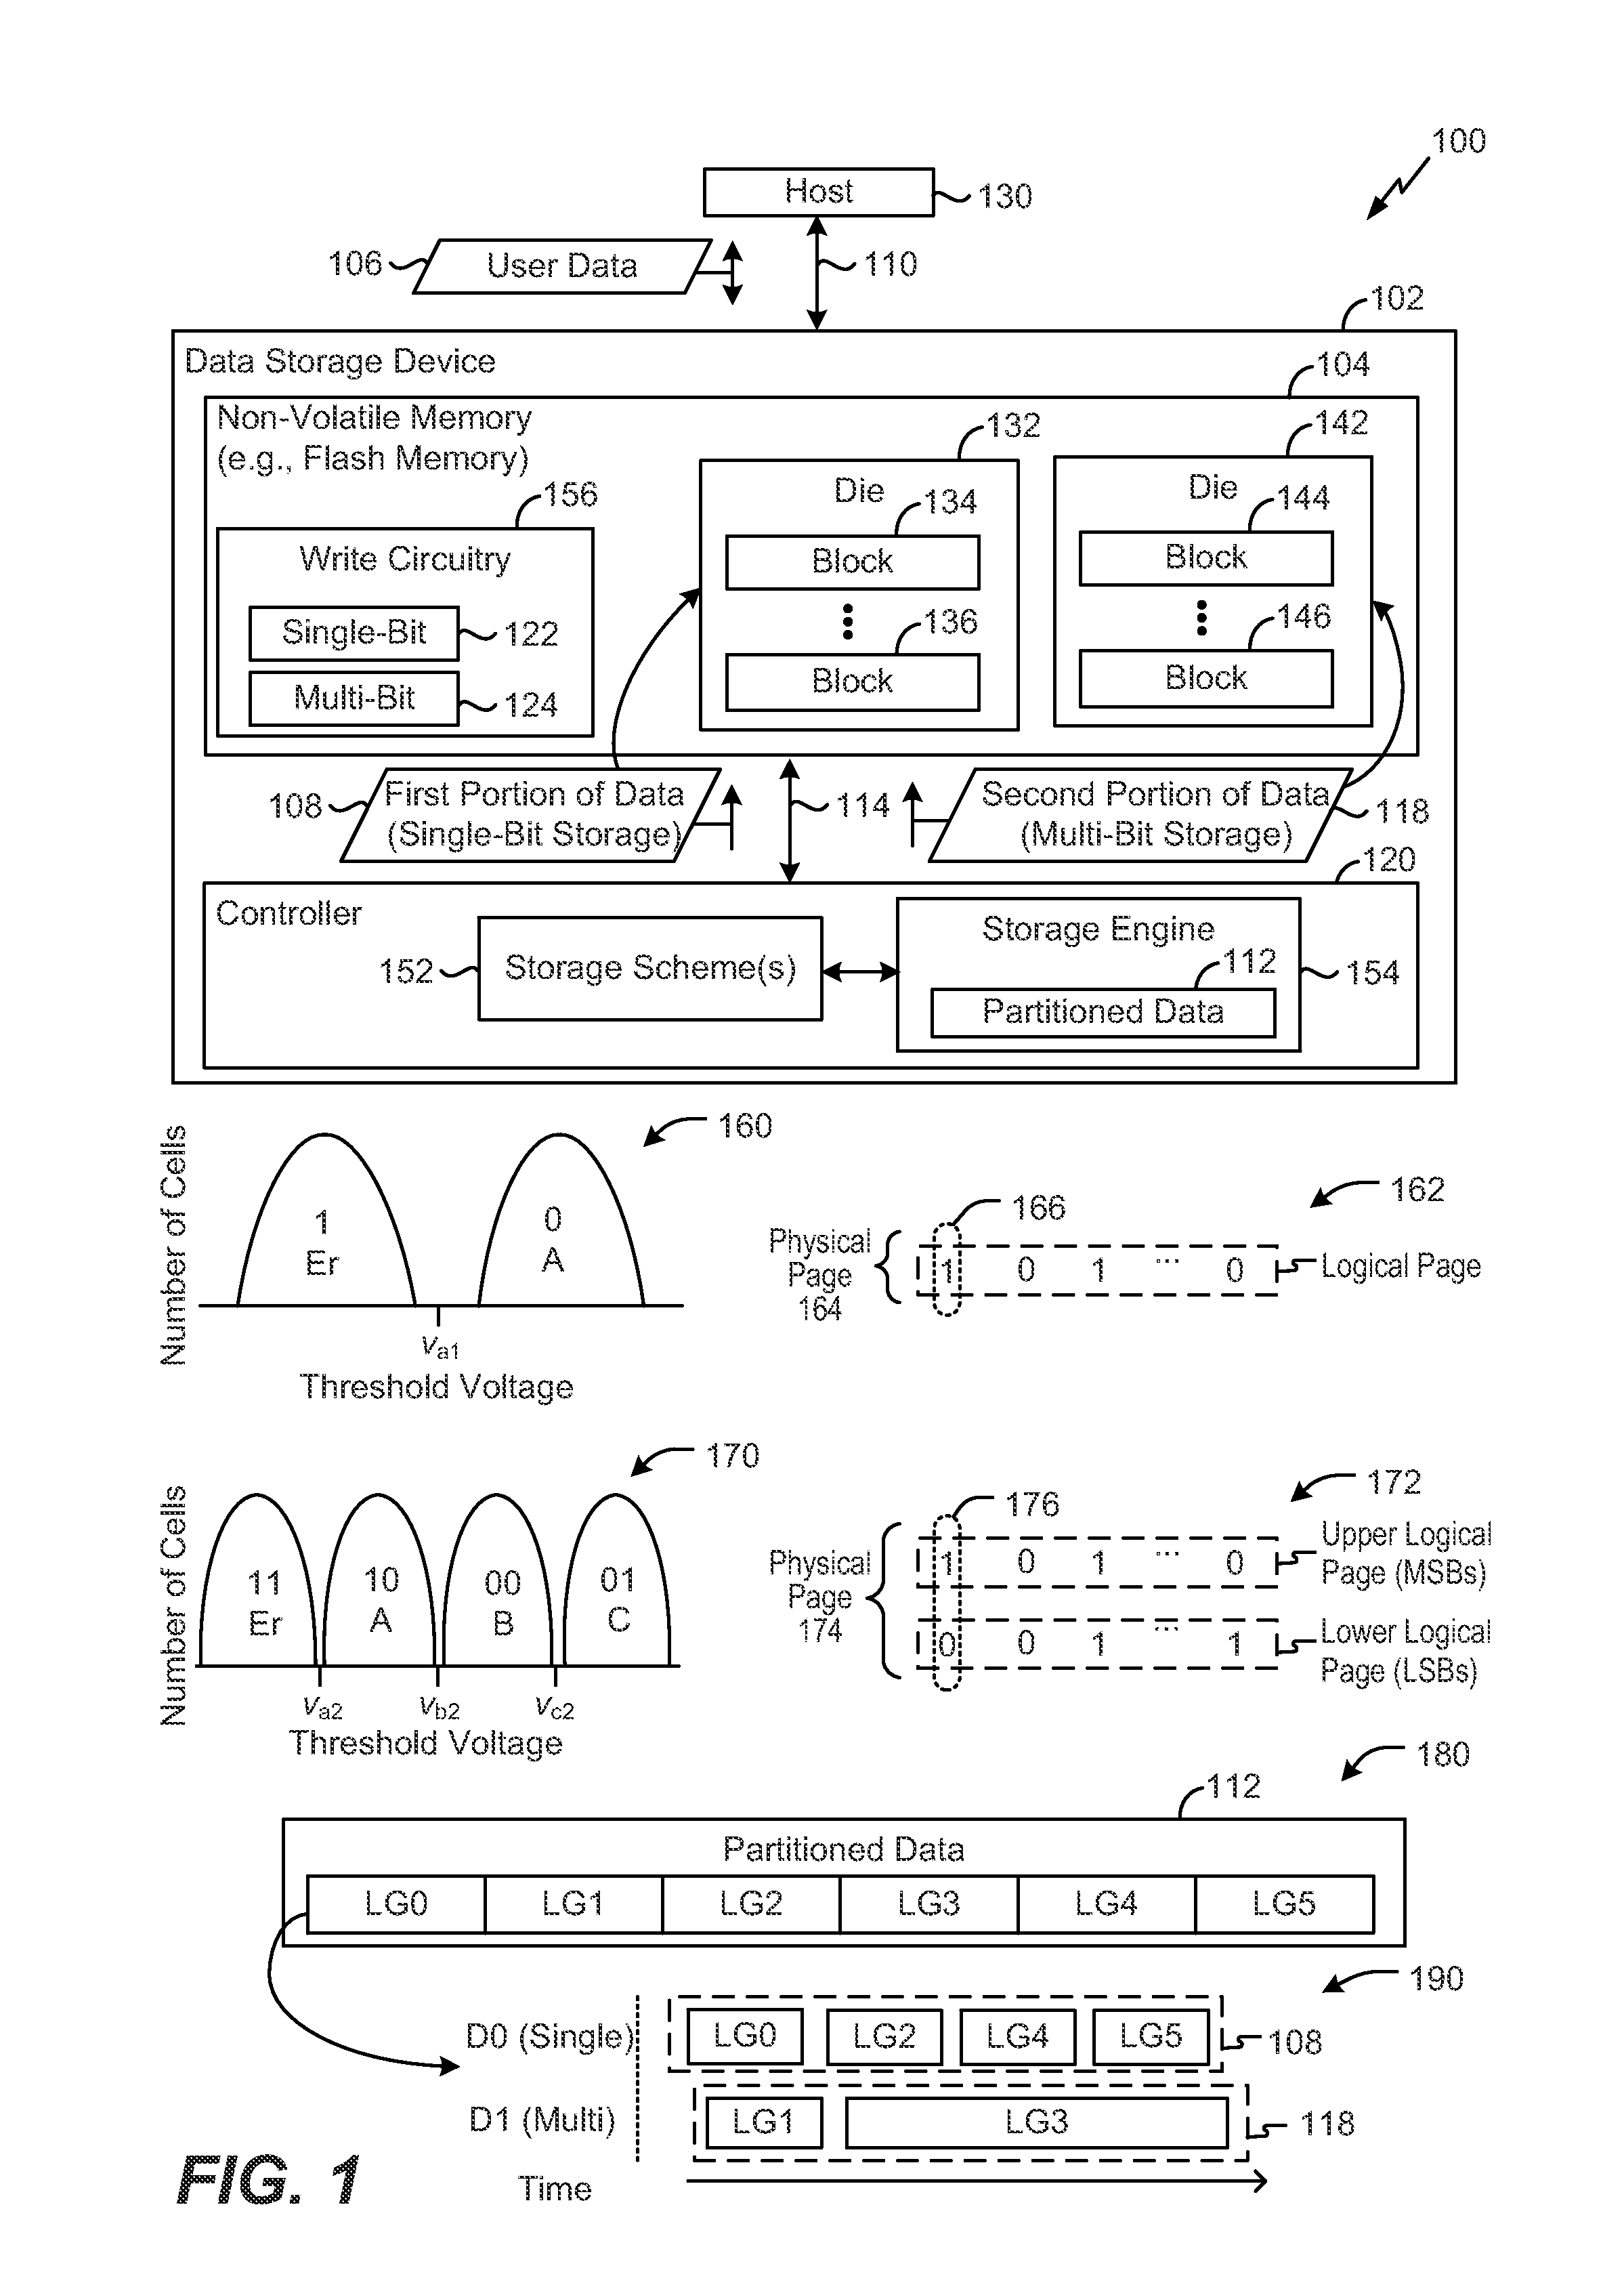 System and method of storing data at a non-volatile memory